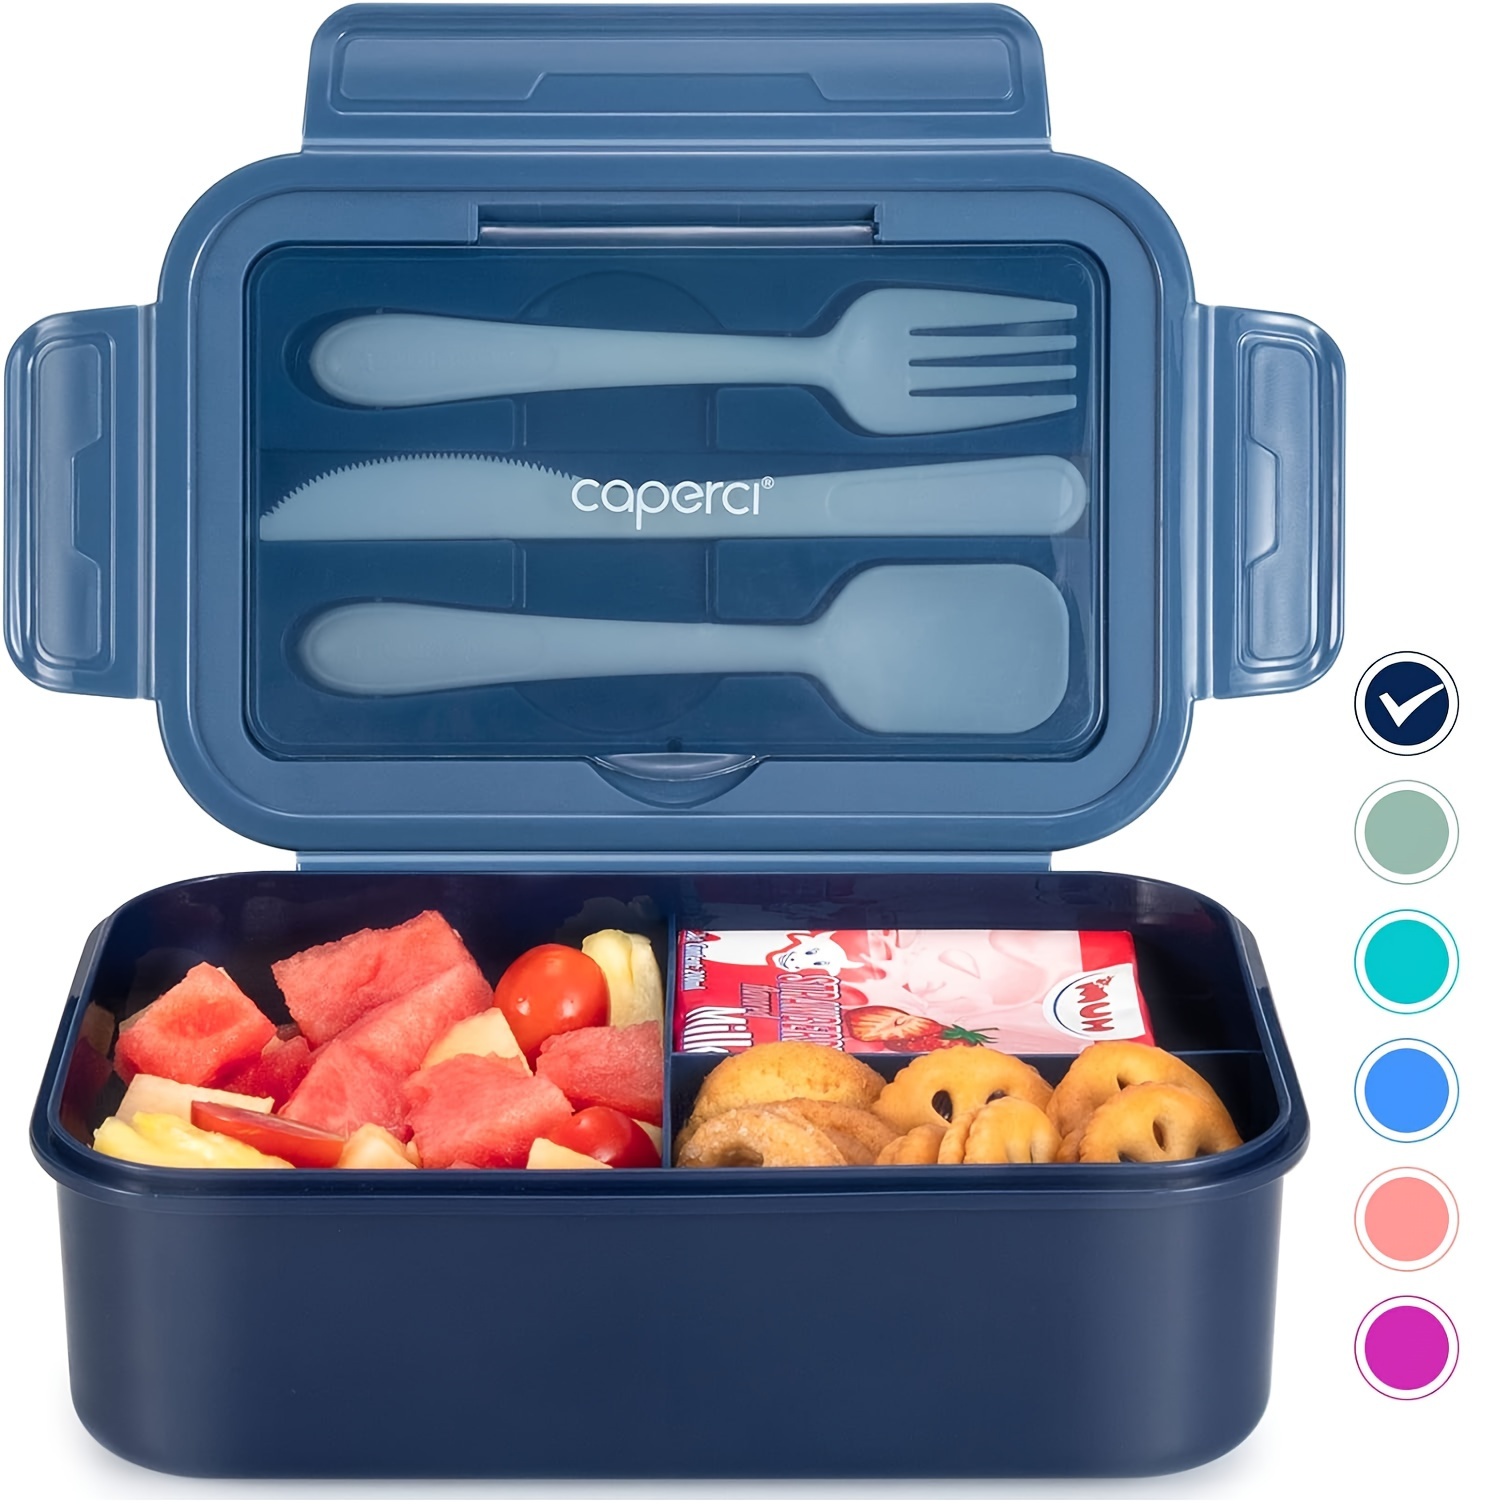 

Leakproof Classic Bento Lunch Box: 47 Oz, 3-compartment, Built-in Utensils, Suitable For Adults And Teens, Microwave Safe, Plastic, Rectangular, Manual, No Power Required